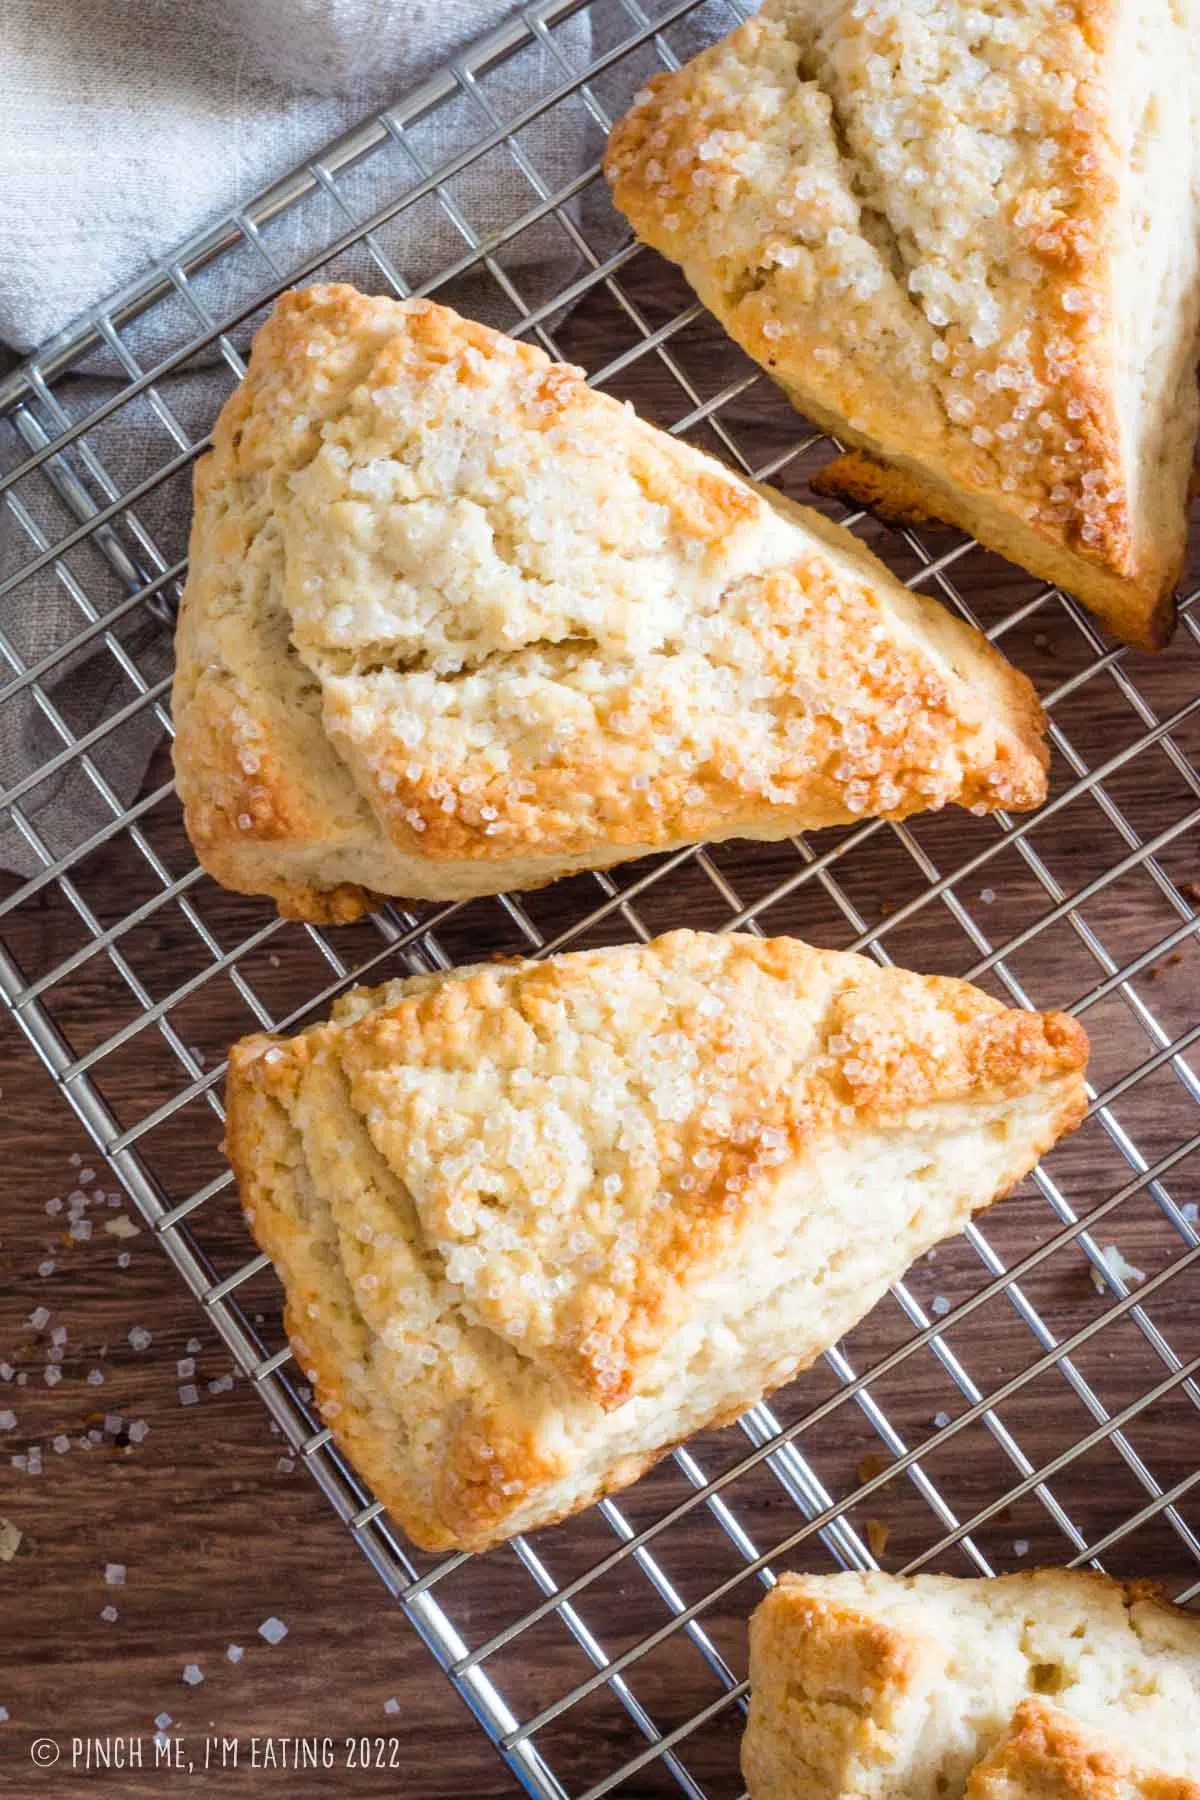 Golden brown plain scones topped with sanding sugar on a metal cooling rack.